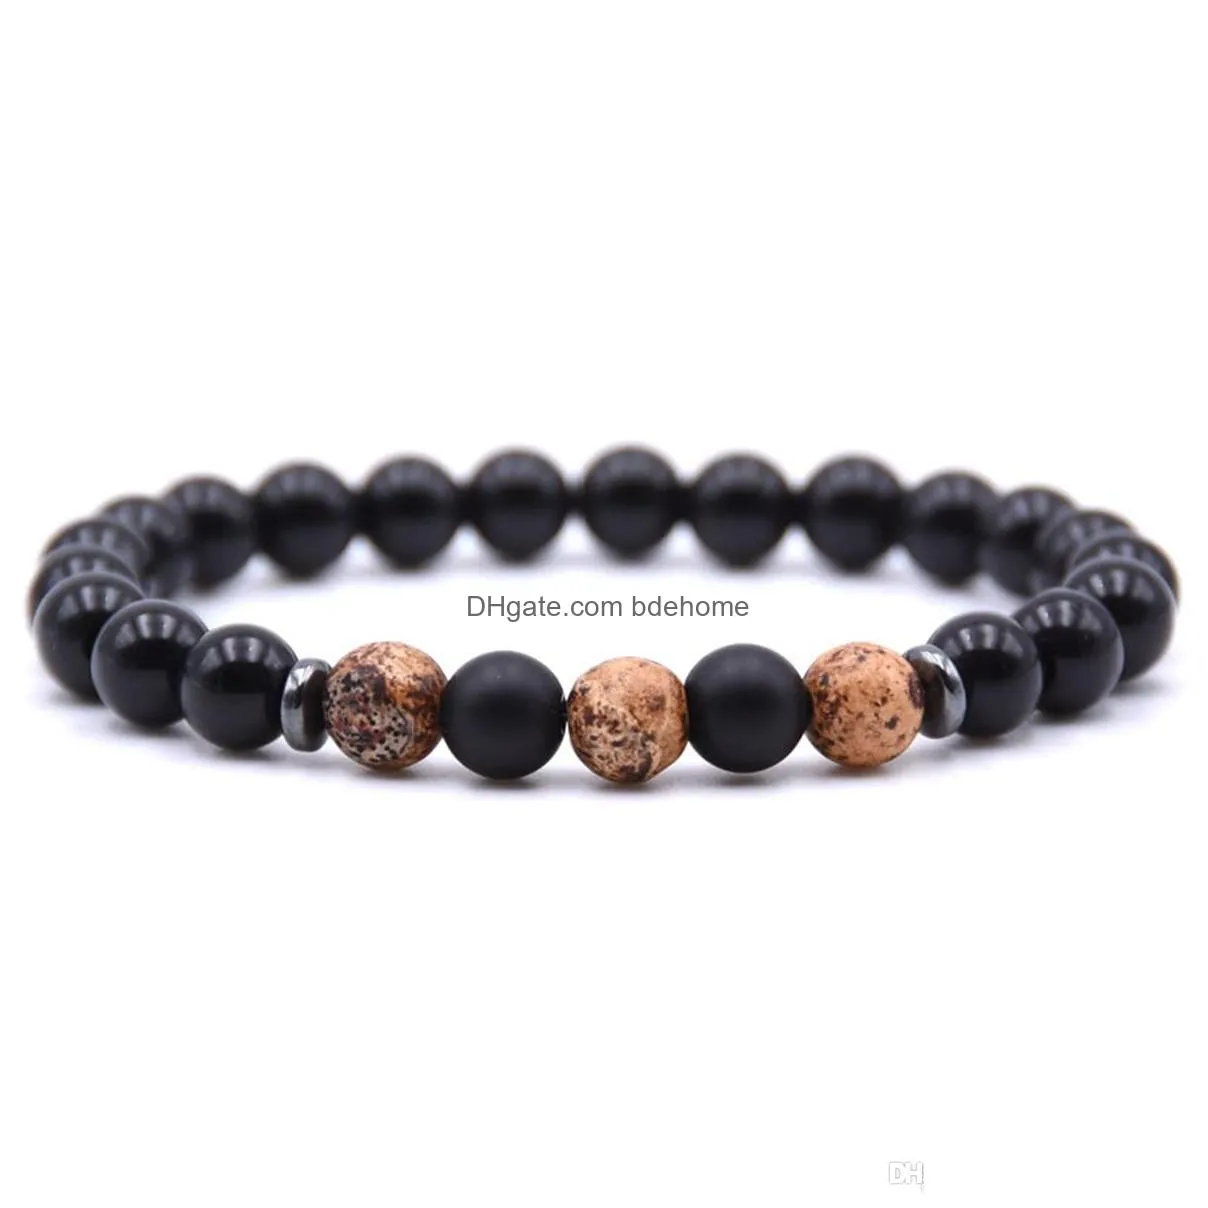 ladies bracelet 8mm lava rock aromatherapy anxiety oil disperser wrist ornament braided rope natural stone yoga bead hand ornament